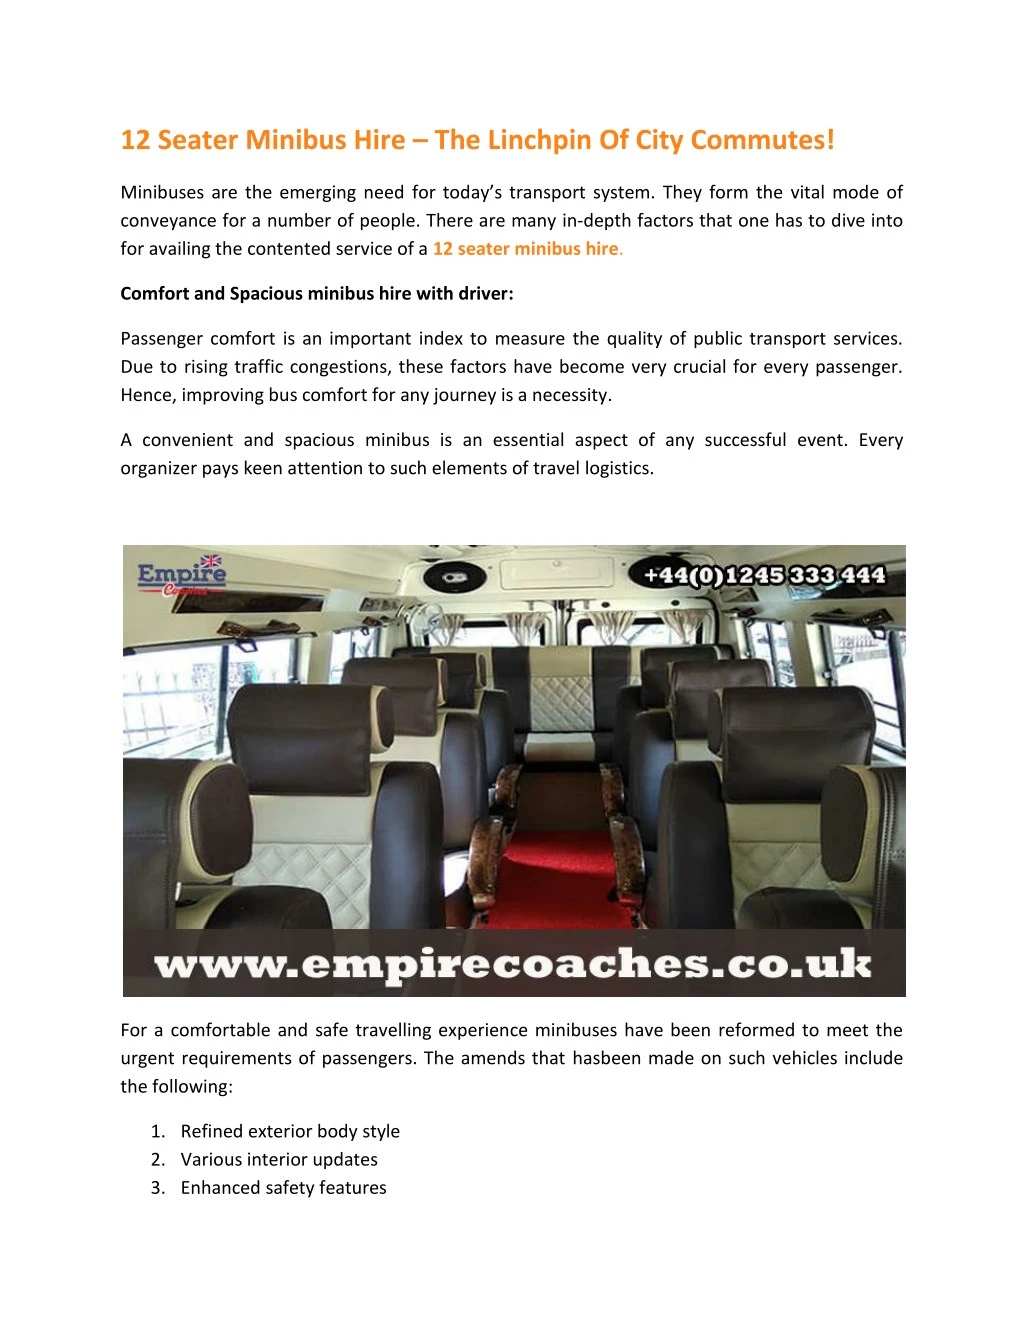 12 seater minibus hire the linchpin of city